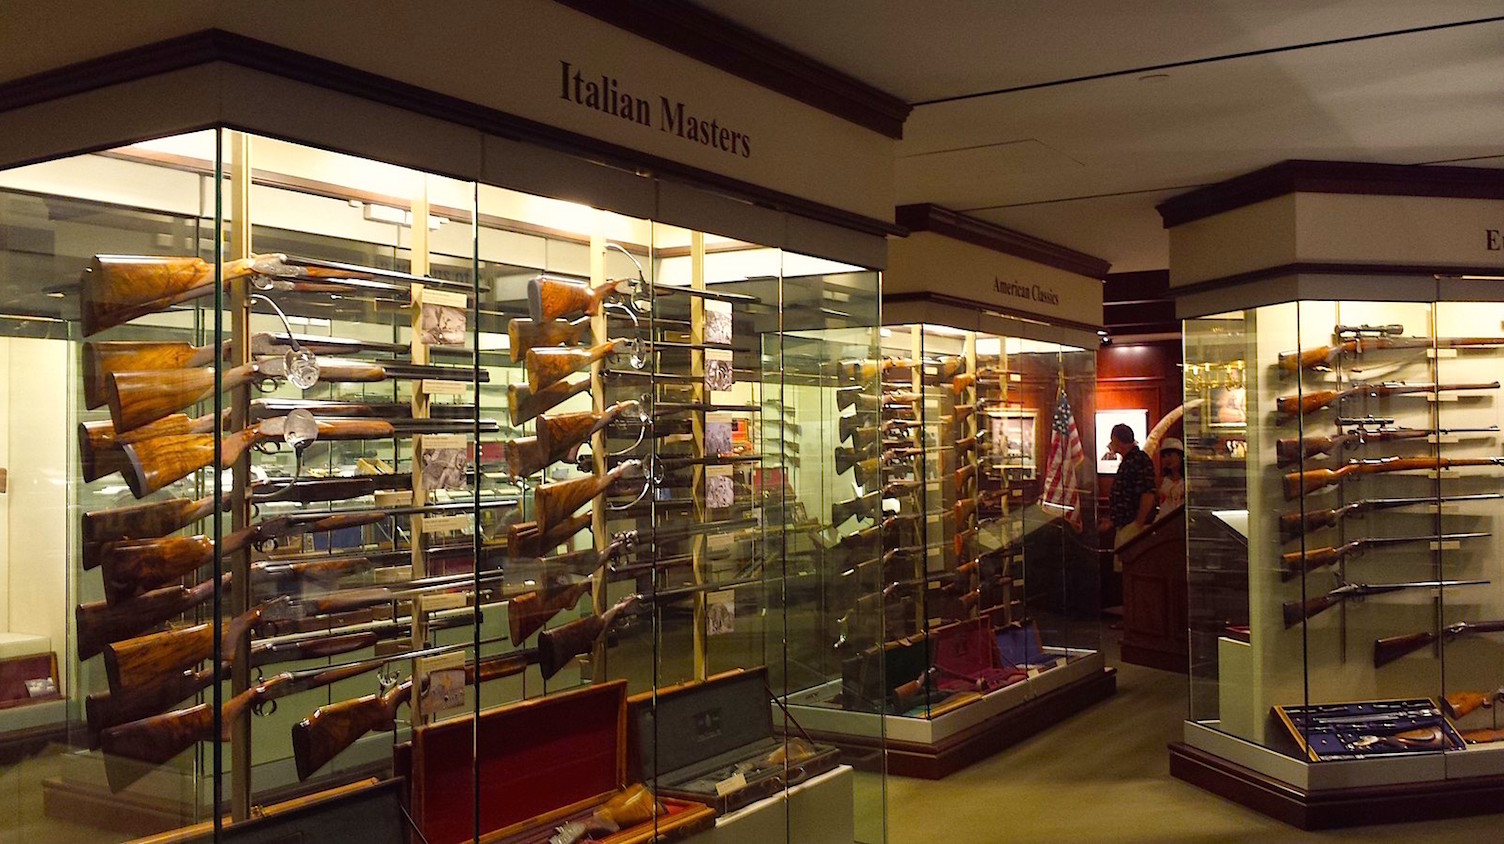 Taking A Tour Through American History At The NRA National Firearms Museum